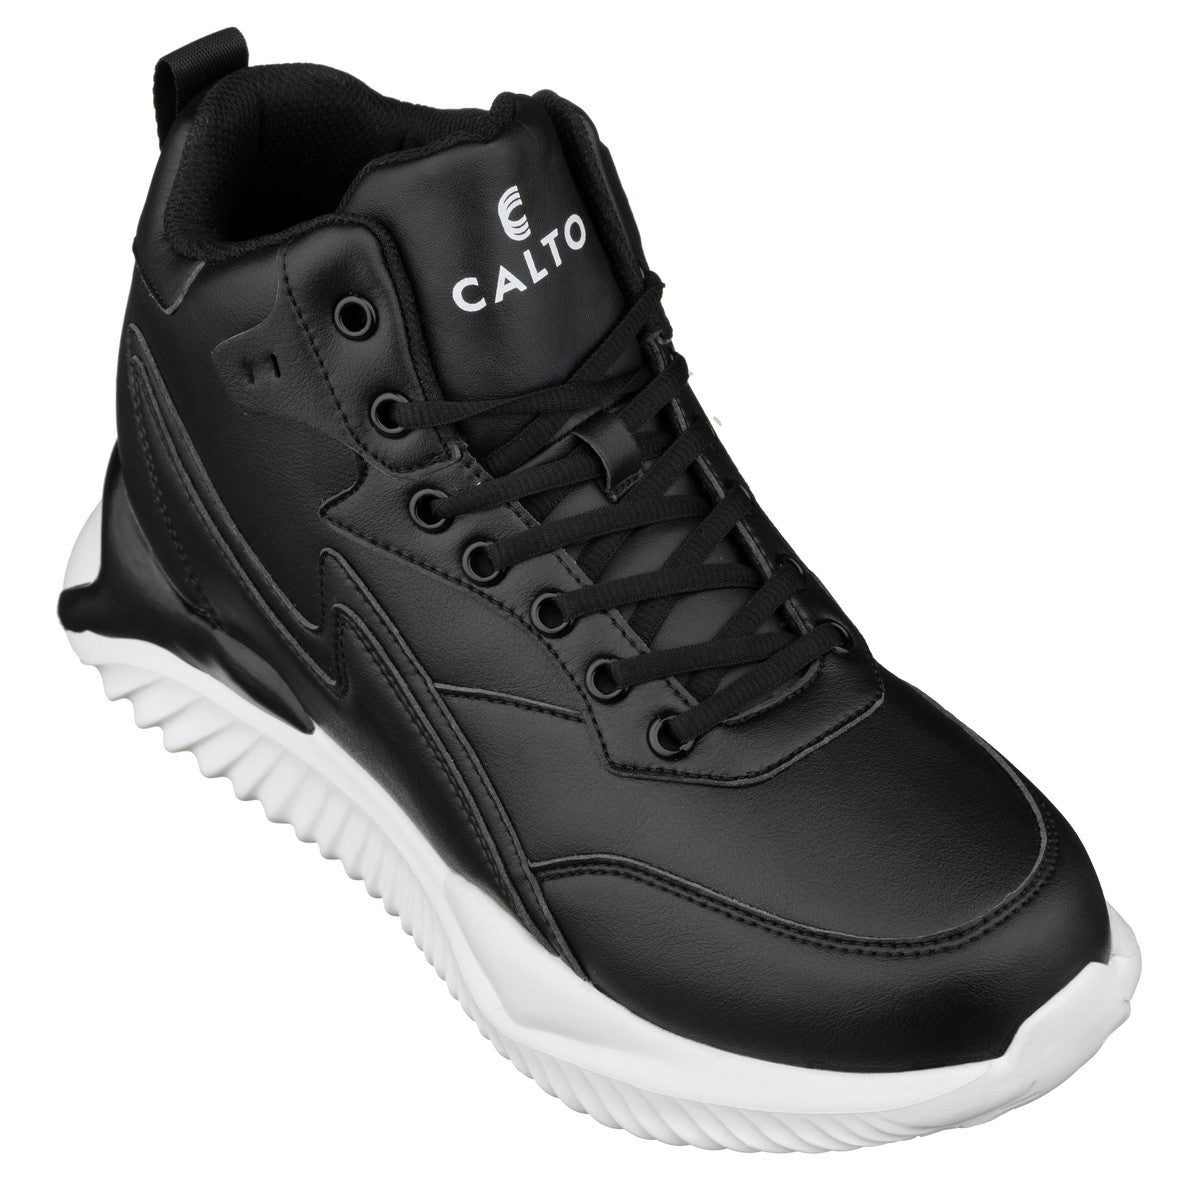 Elevator shoes height increase CALTO - S3060 - 4 Inches Taller (Black) - Lightweight Sneakers